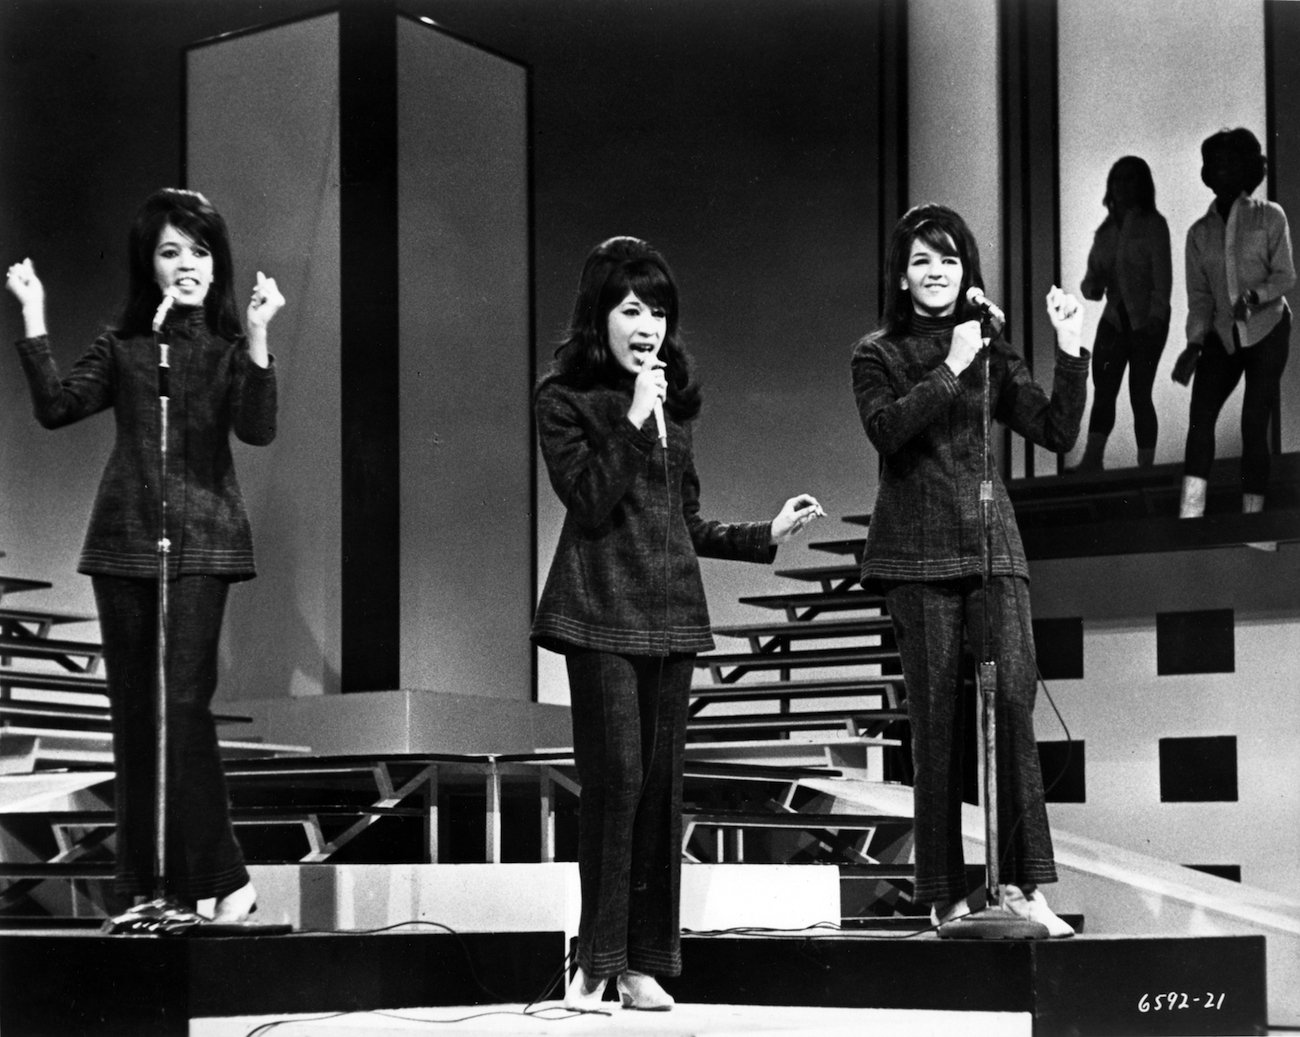 The Ronettes, Estelle Bennett, Ronnie Spector, and Nedra Talley Ross, performing in black on a TV show in 1965.